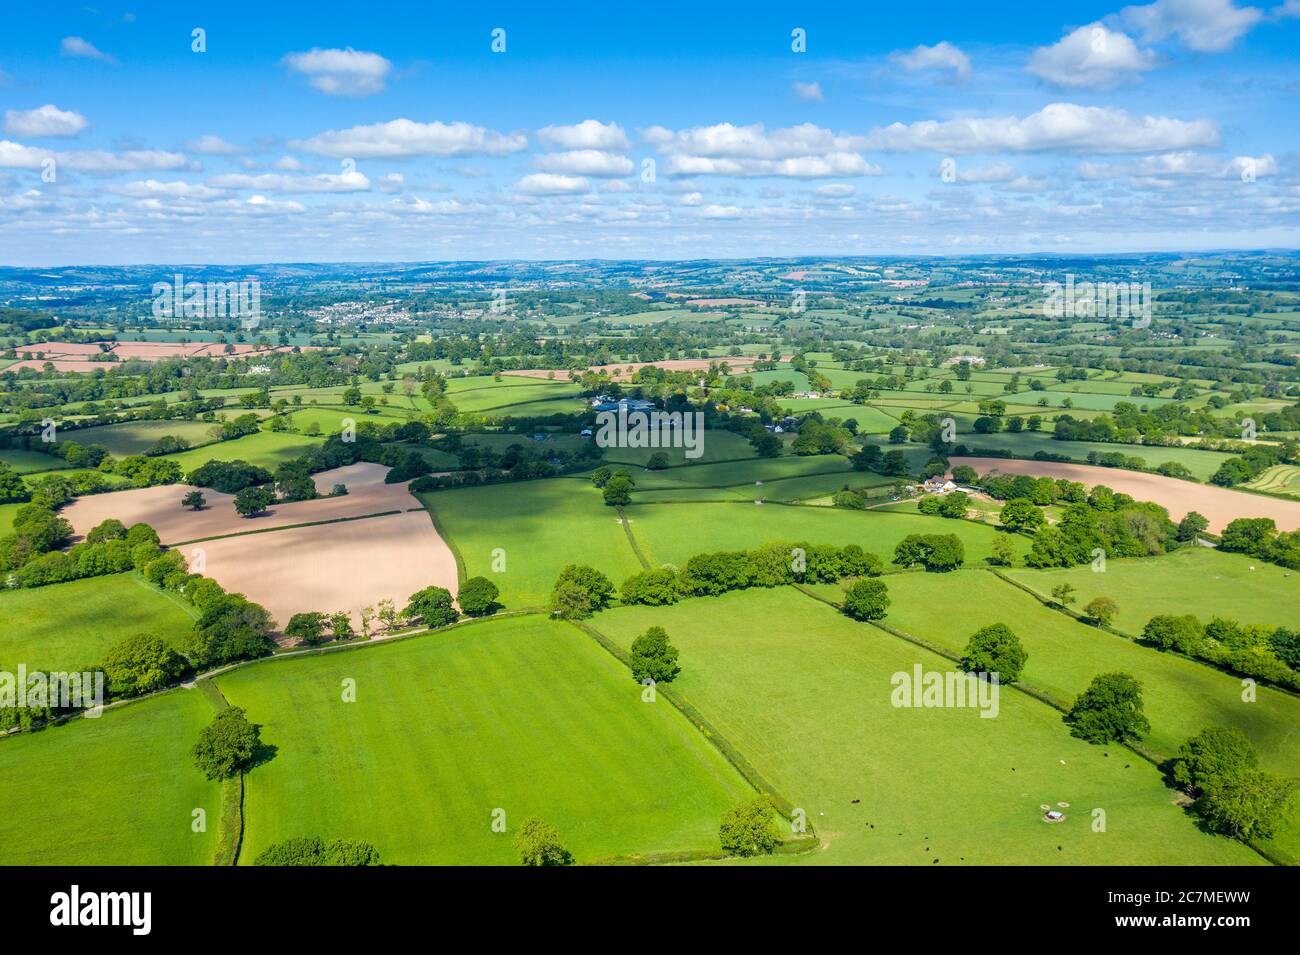 Blackdown Hills, Areas of Outstanding Natural Beauty near Craddock, Devon, England, United Kingdom, Europe Stock Photo